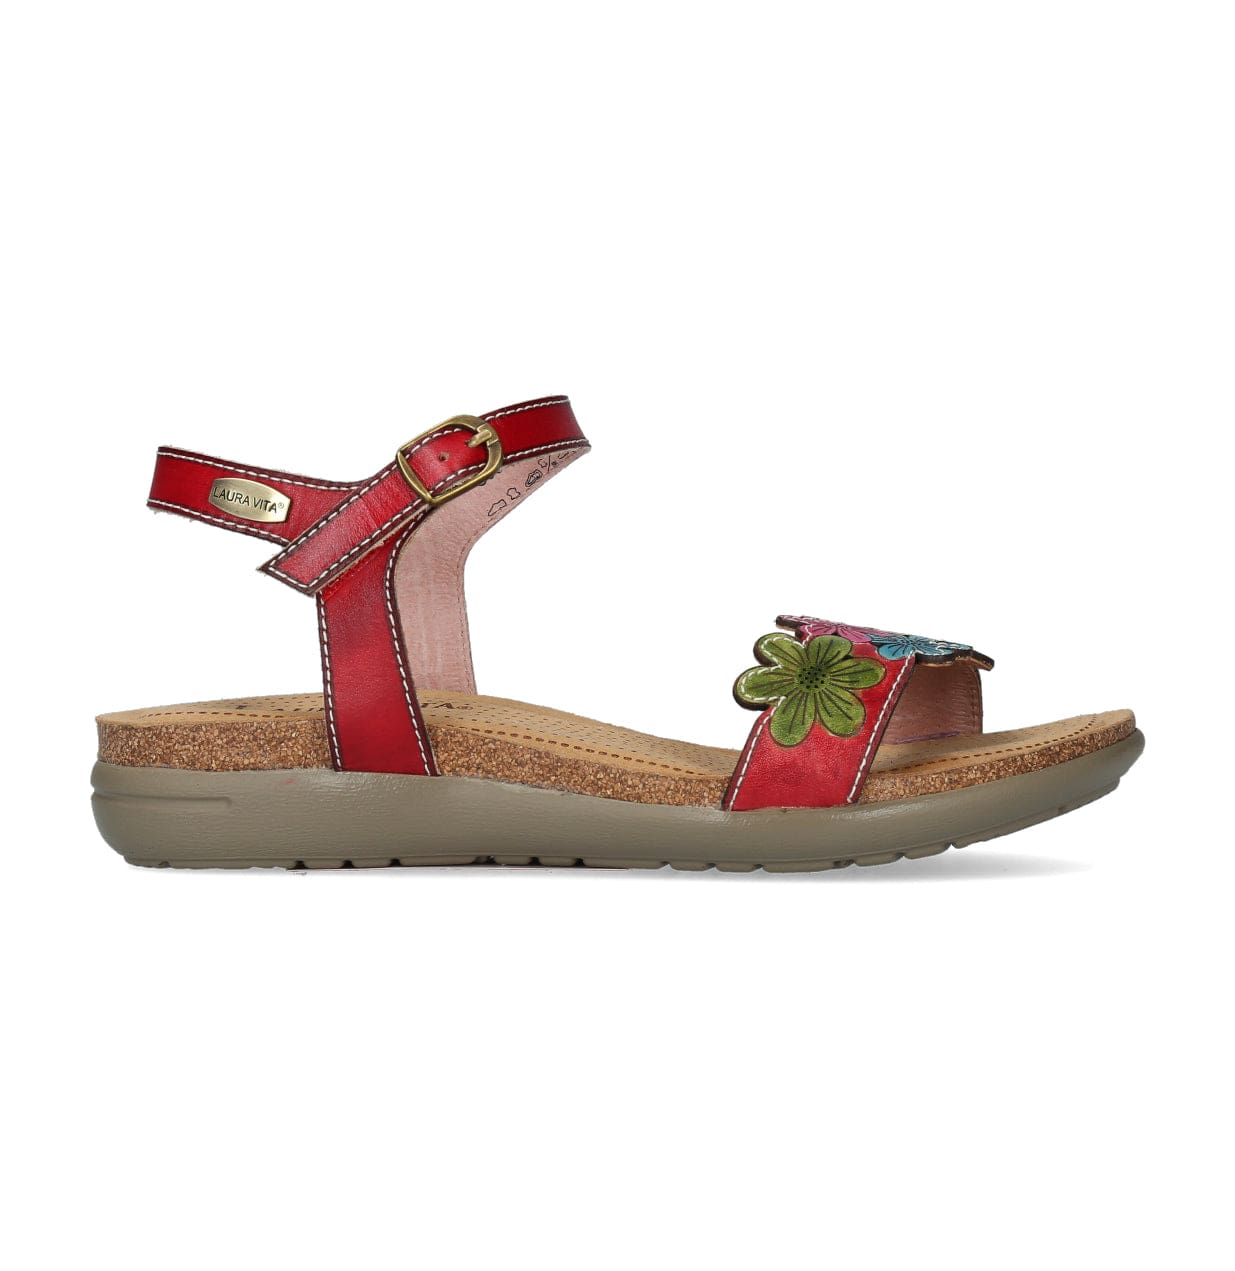 Chaussures LILOO 10 - 35 / Rouge - Sandale